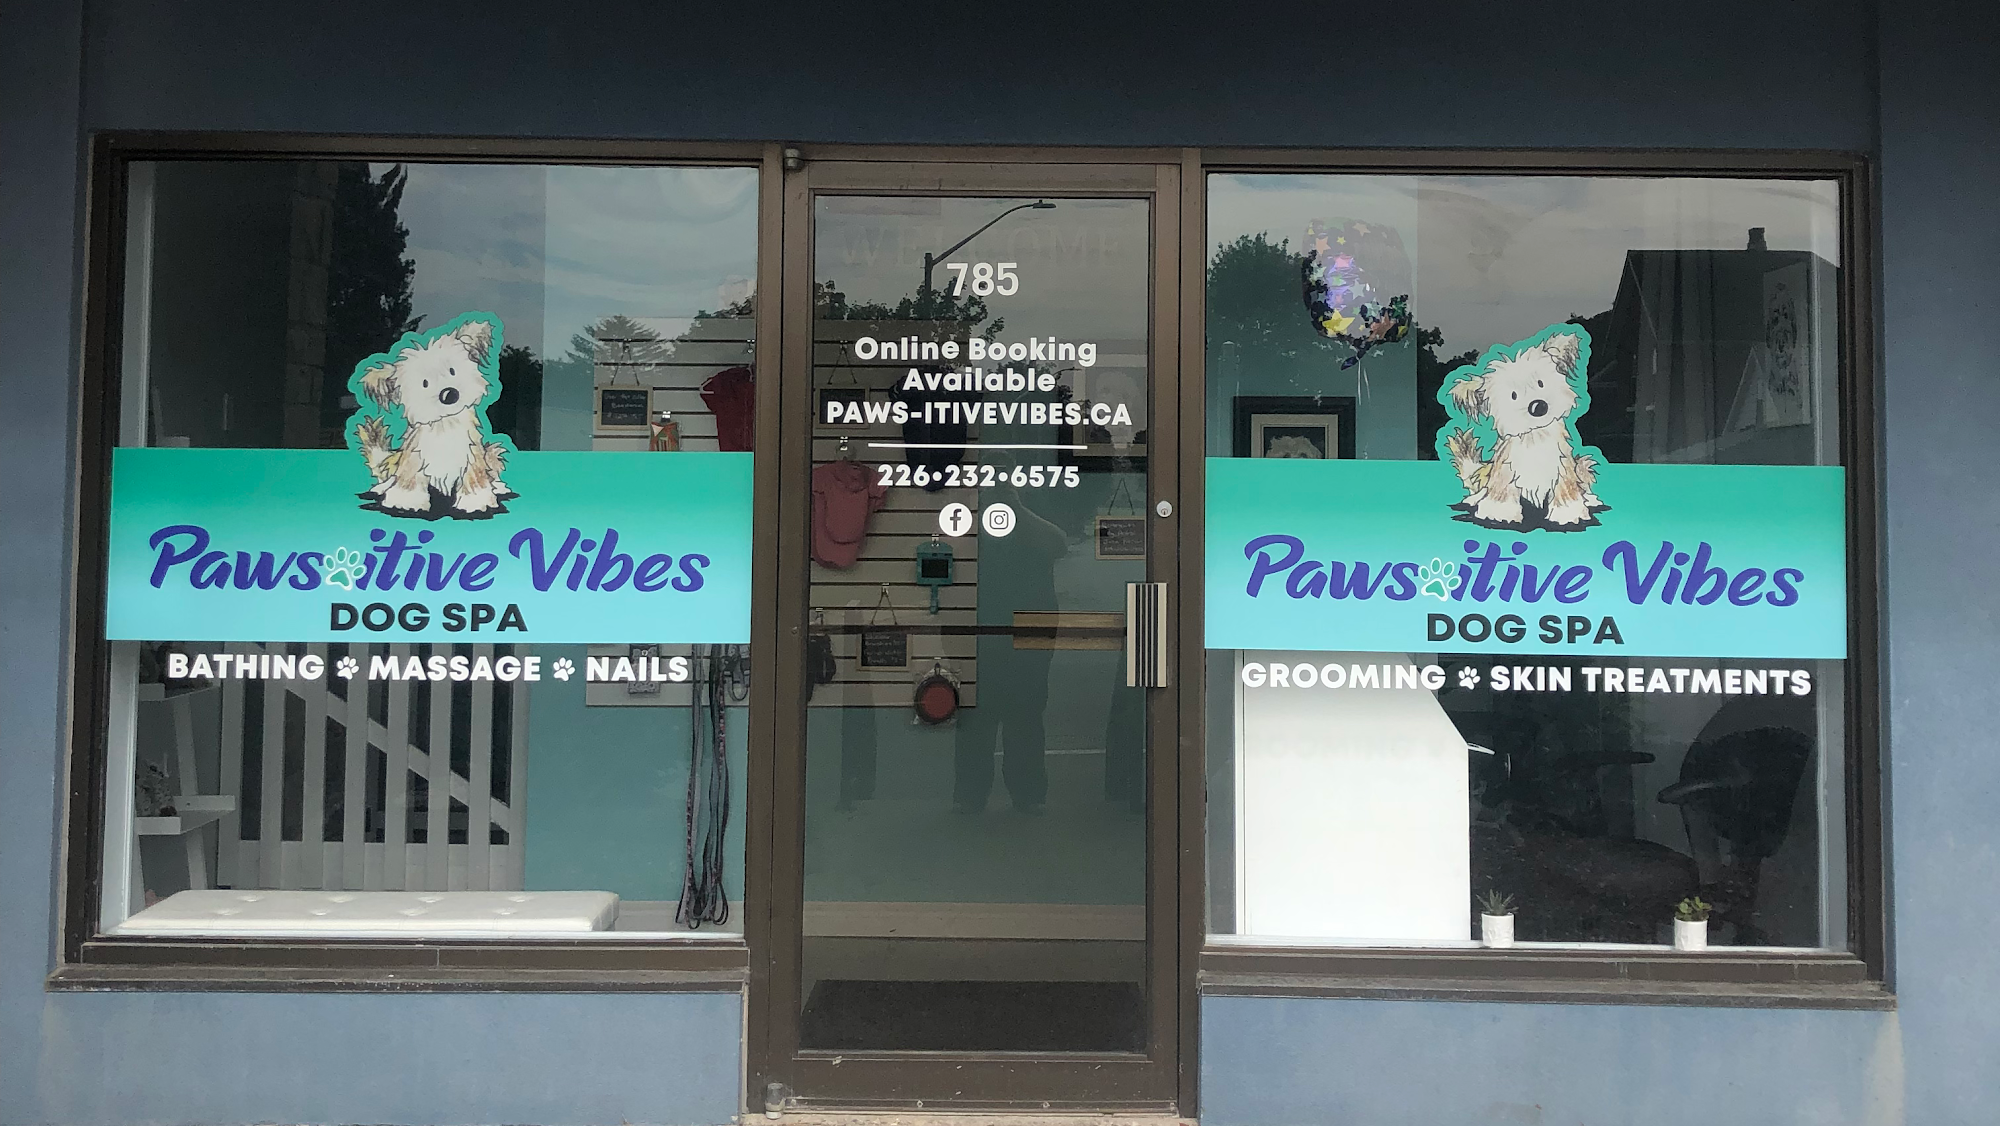 Paws-itive Vibes Dog Spa